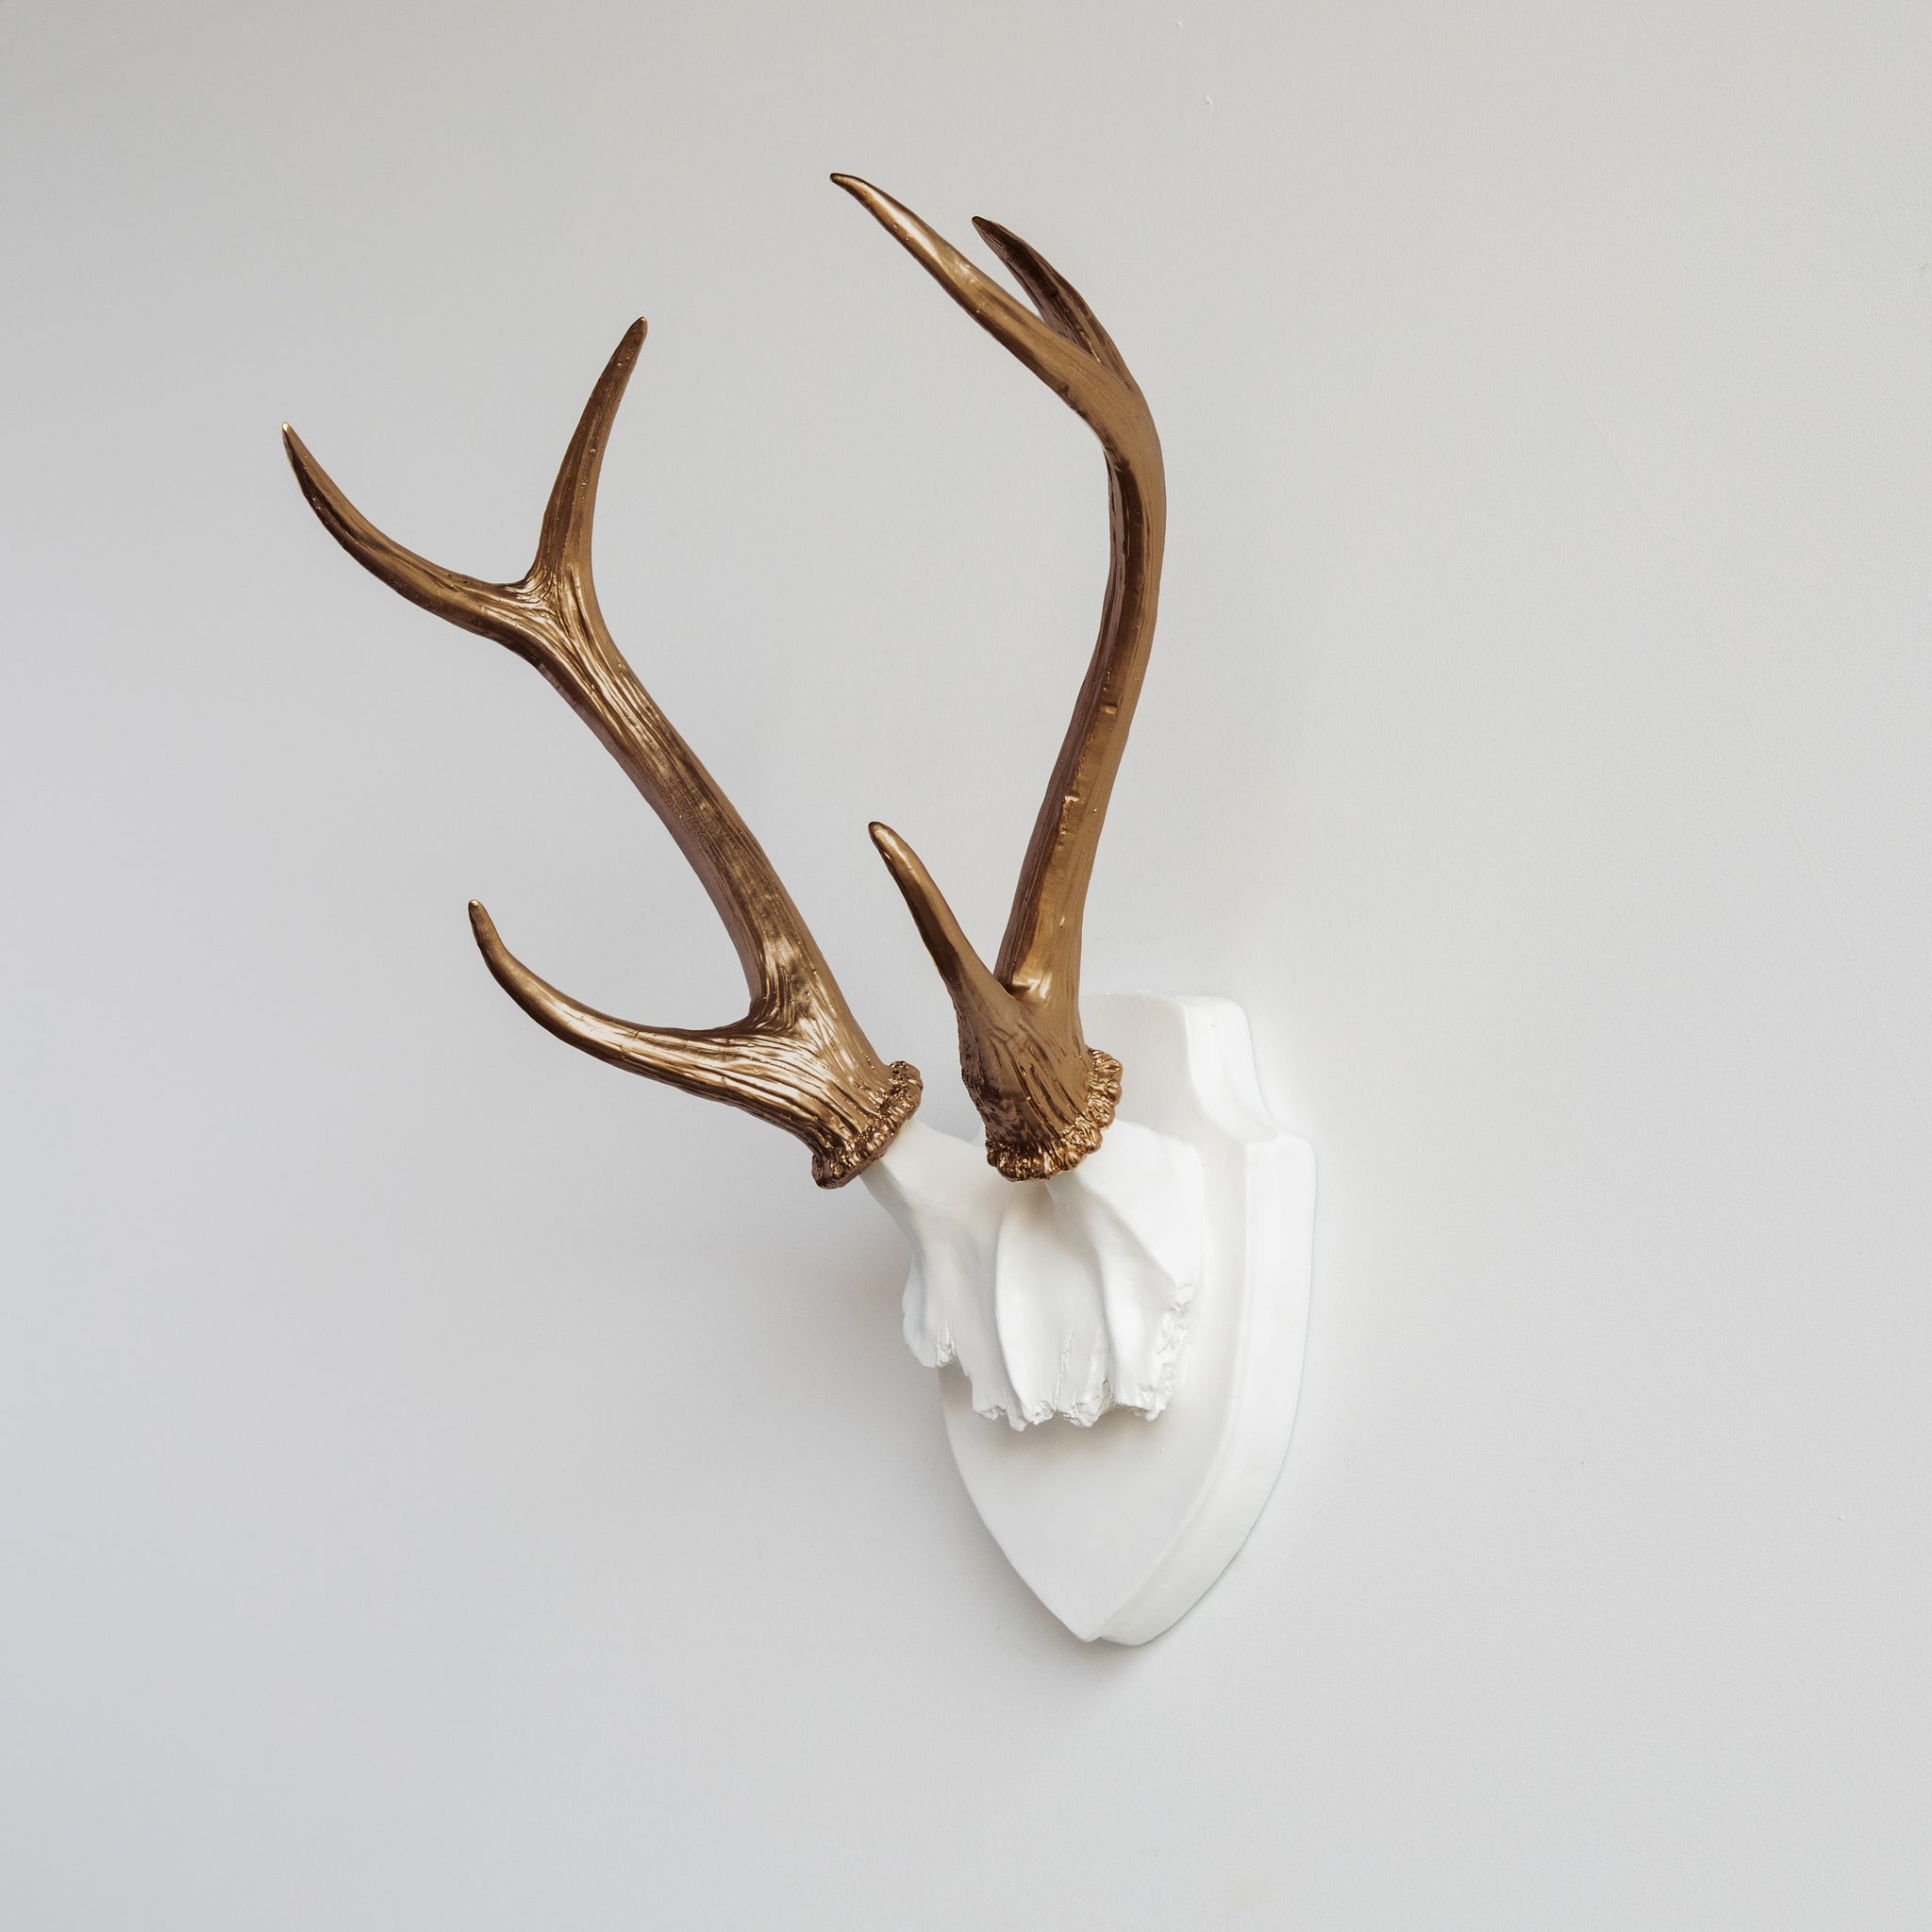 Faux Deer Antler Wall Trophy // White and Bronze